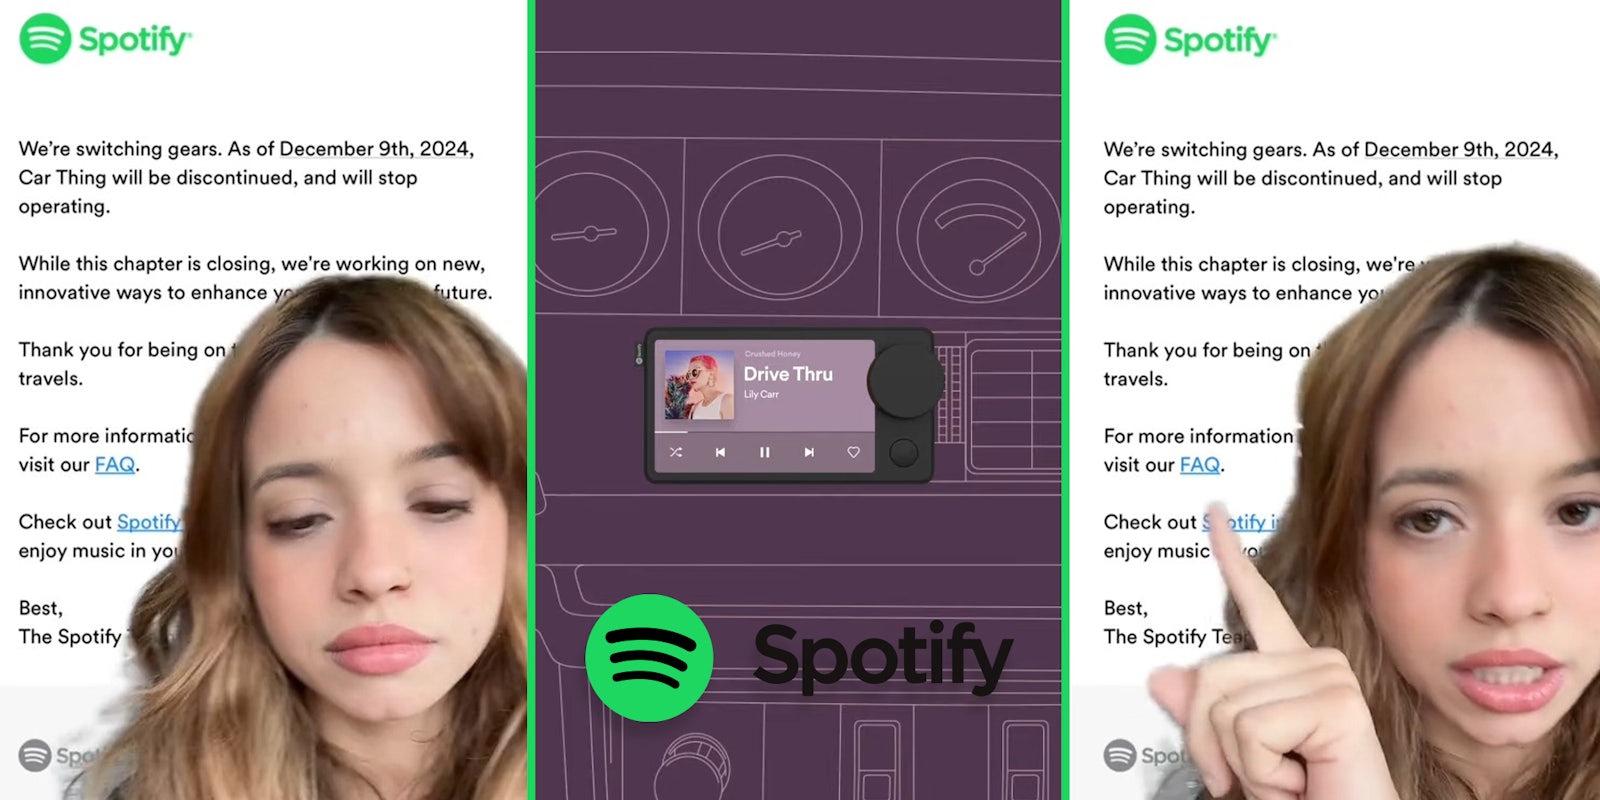 Driver says this popular Spotify product is being discontinued